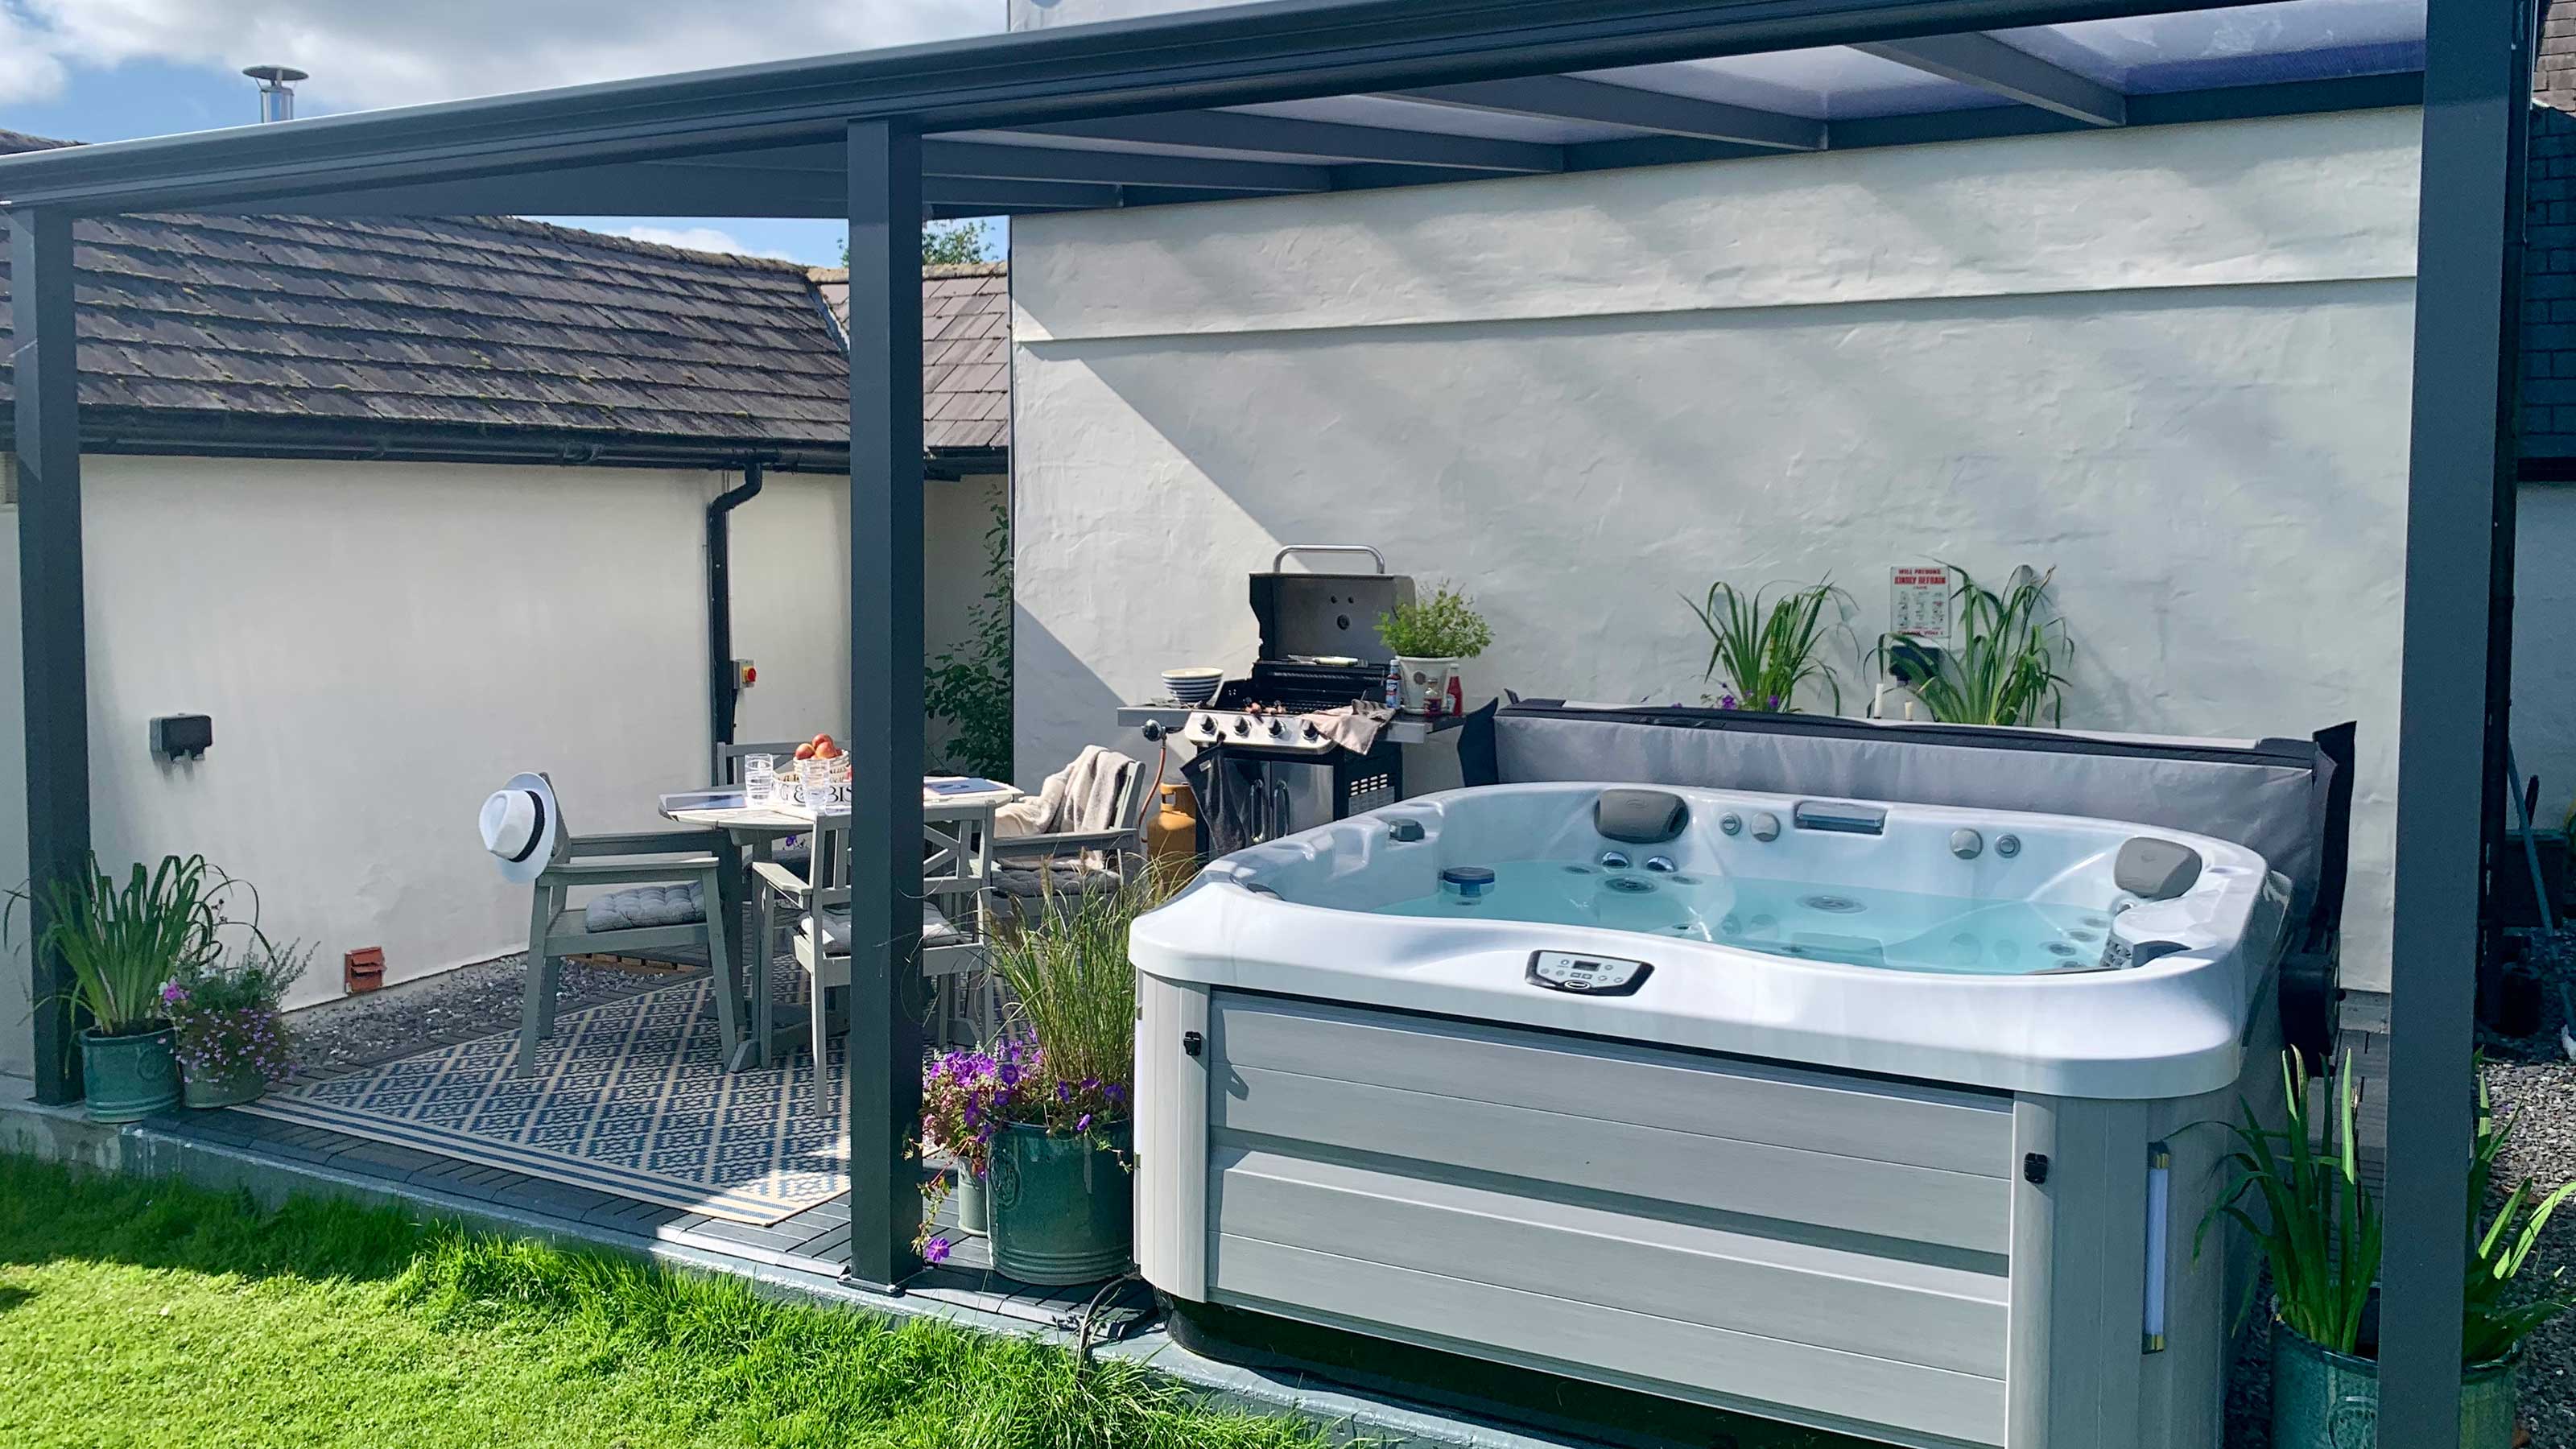 Hot Tub Shelter Ideas: 11 Enclosures, Canopies, And More | Gardeningetc